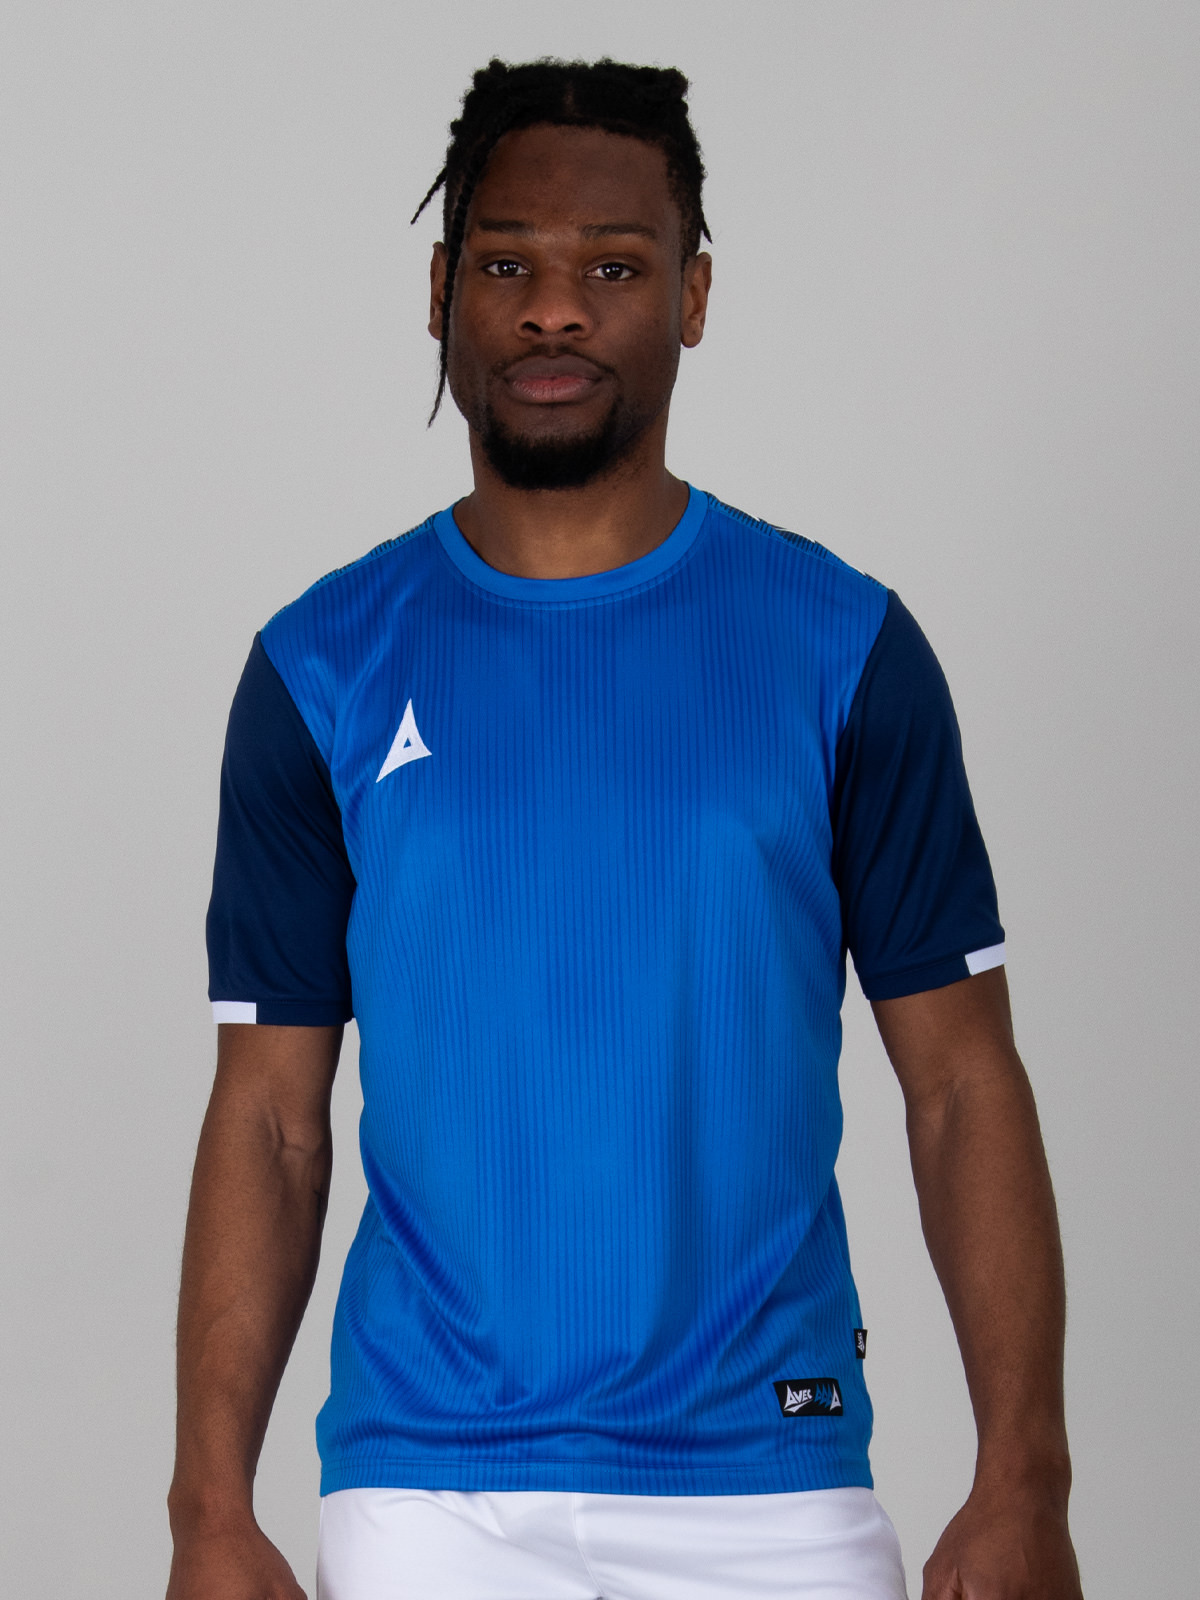 a royal blue football shirt with graphic print, is complimented with navy sleeves.